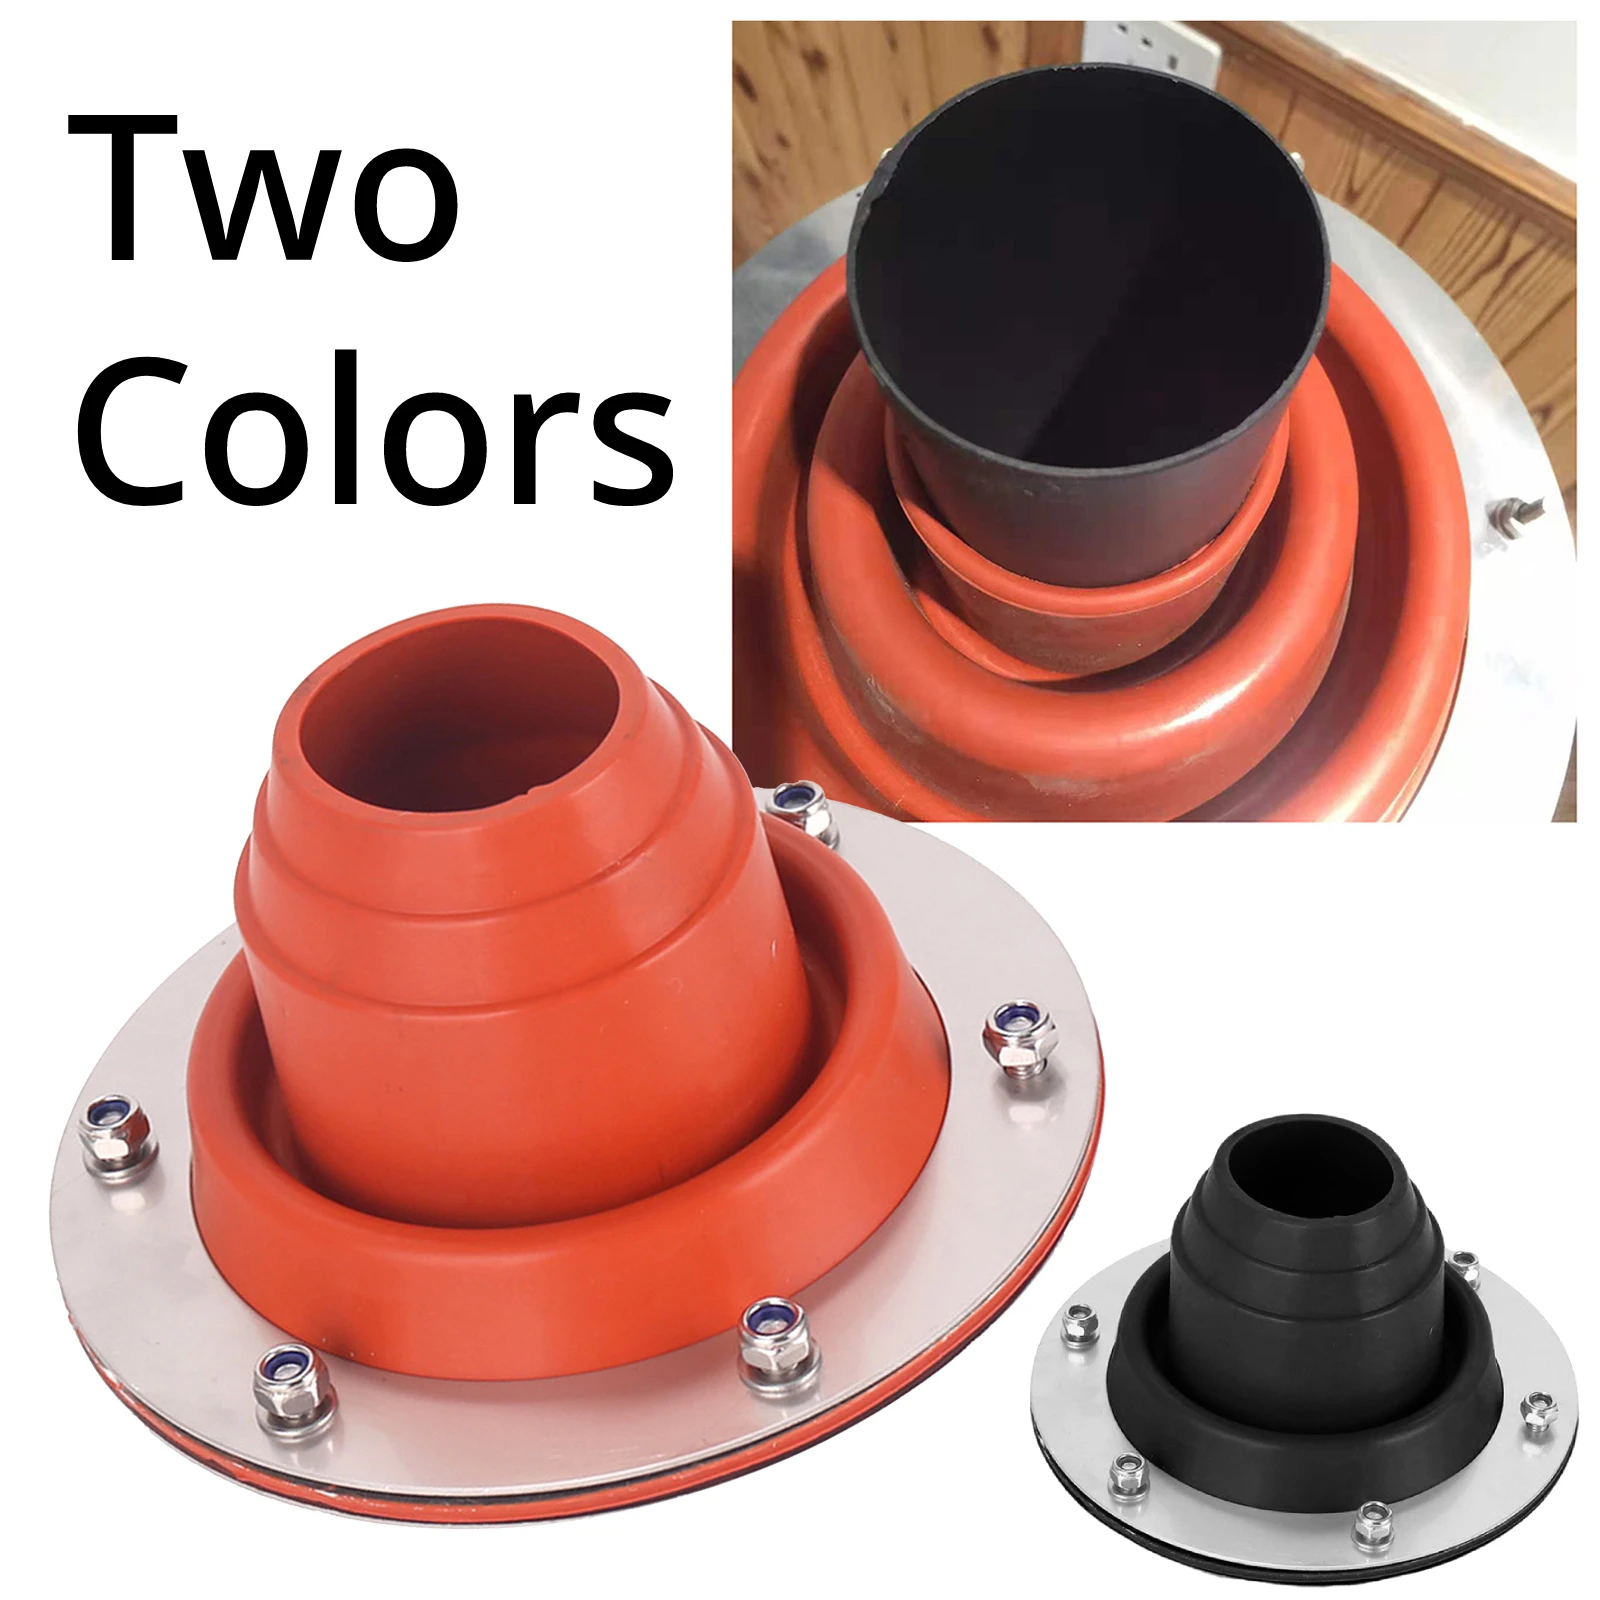 

Silicone Tent Stove Jack Furnace Wood Stove Chimney Vent with Durable Steel Base for Outdoor Camping Accessories